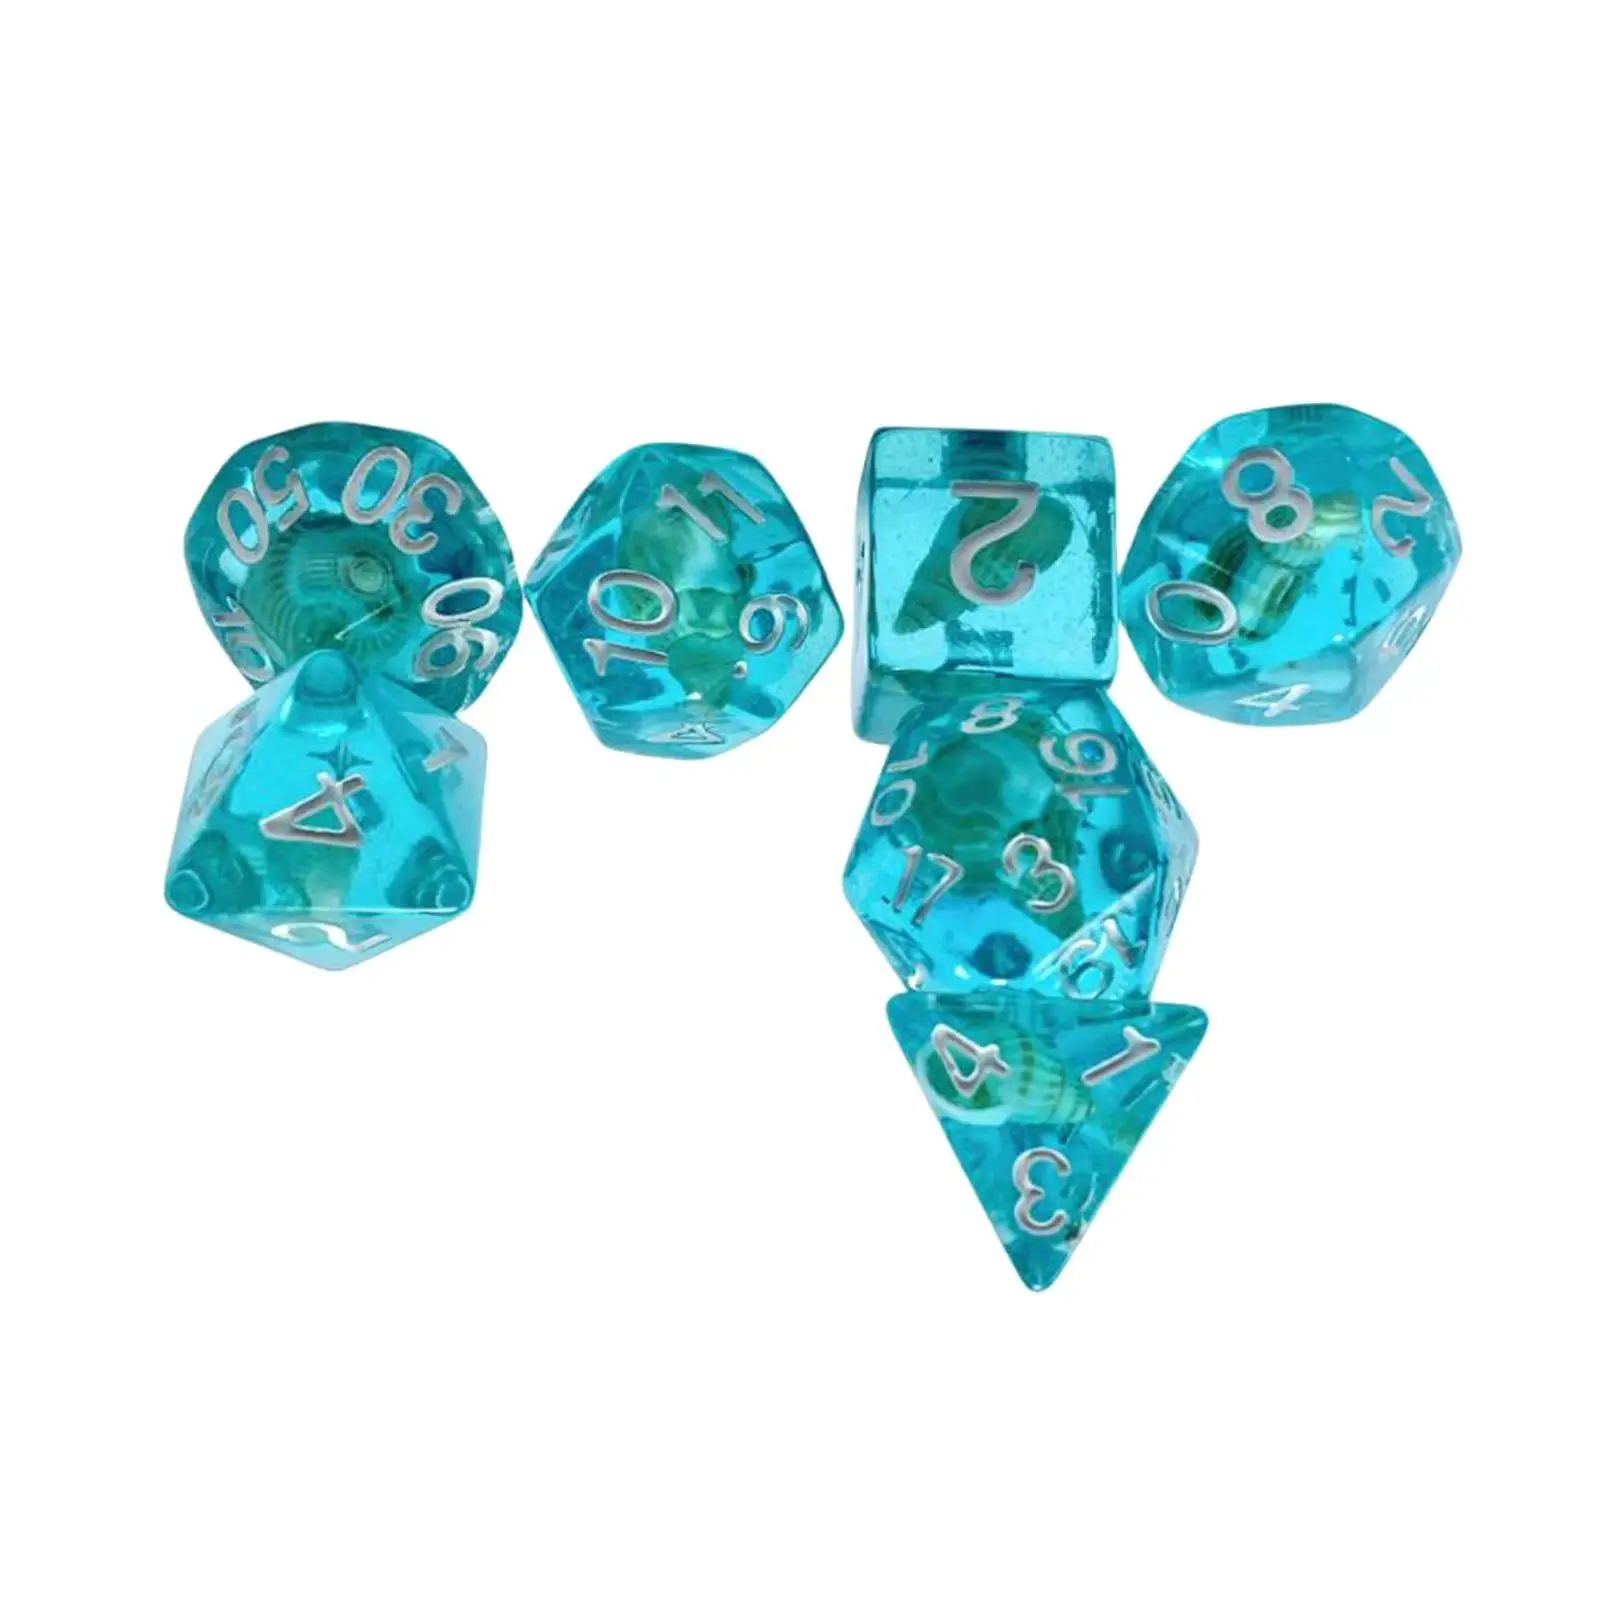 7x Polyhedral Dices Set D4 D8 D10 D12 D20 Party Favors Acrylic Dices for Table Party Game Board Game Card Game Card Games